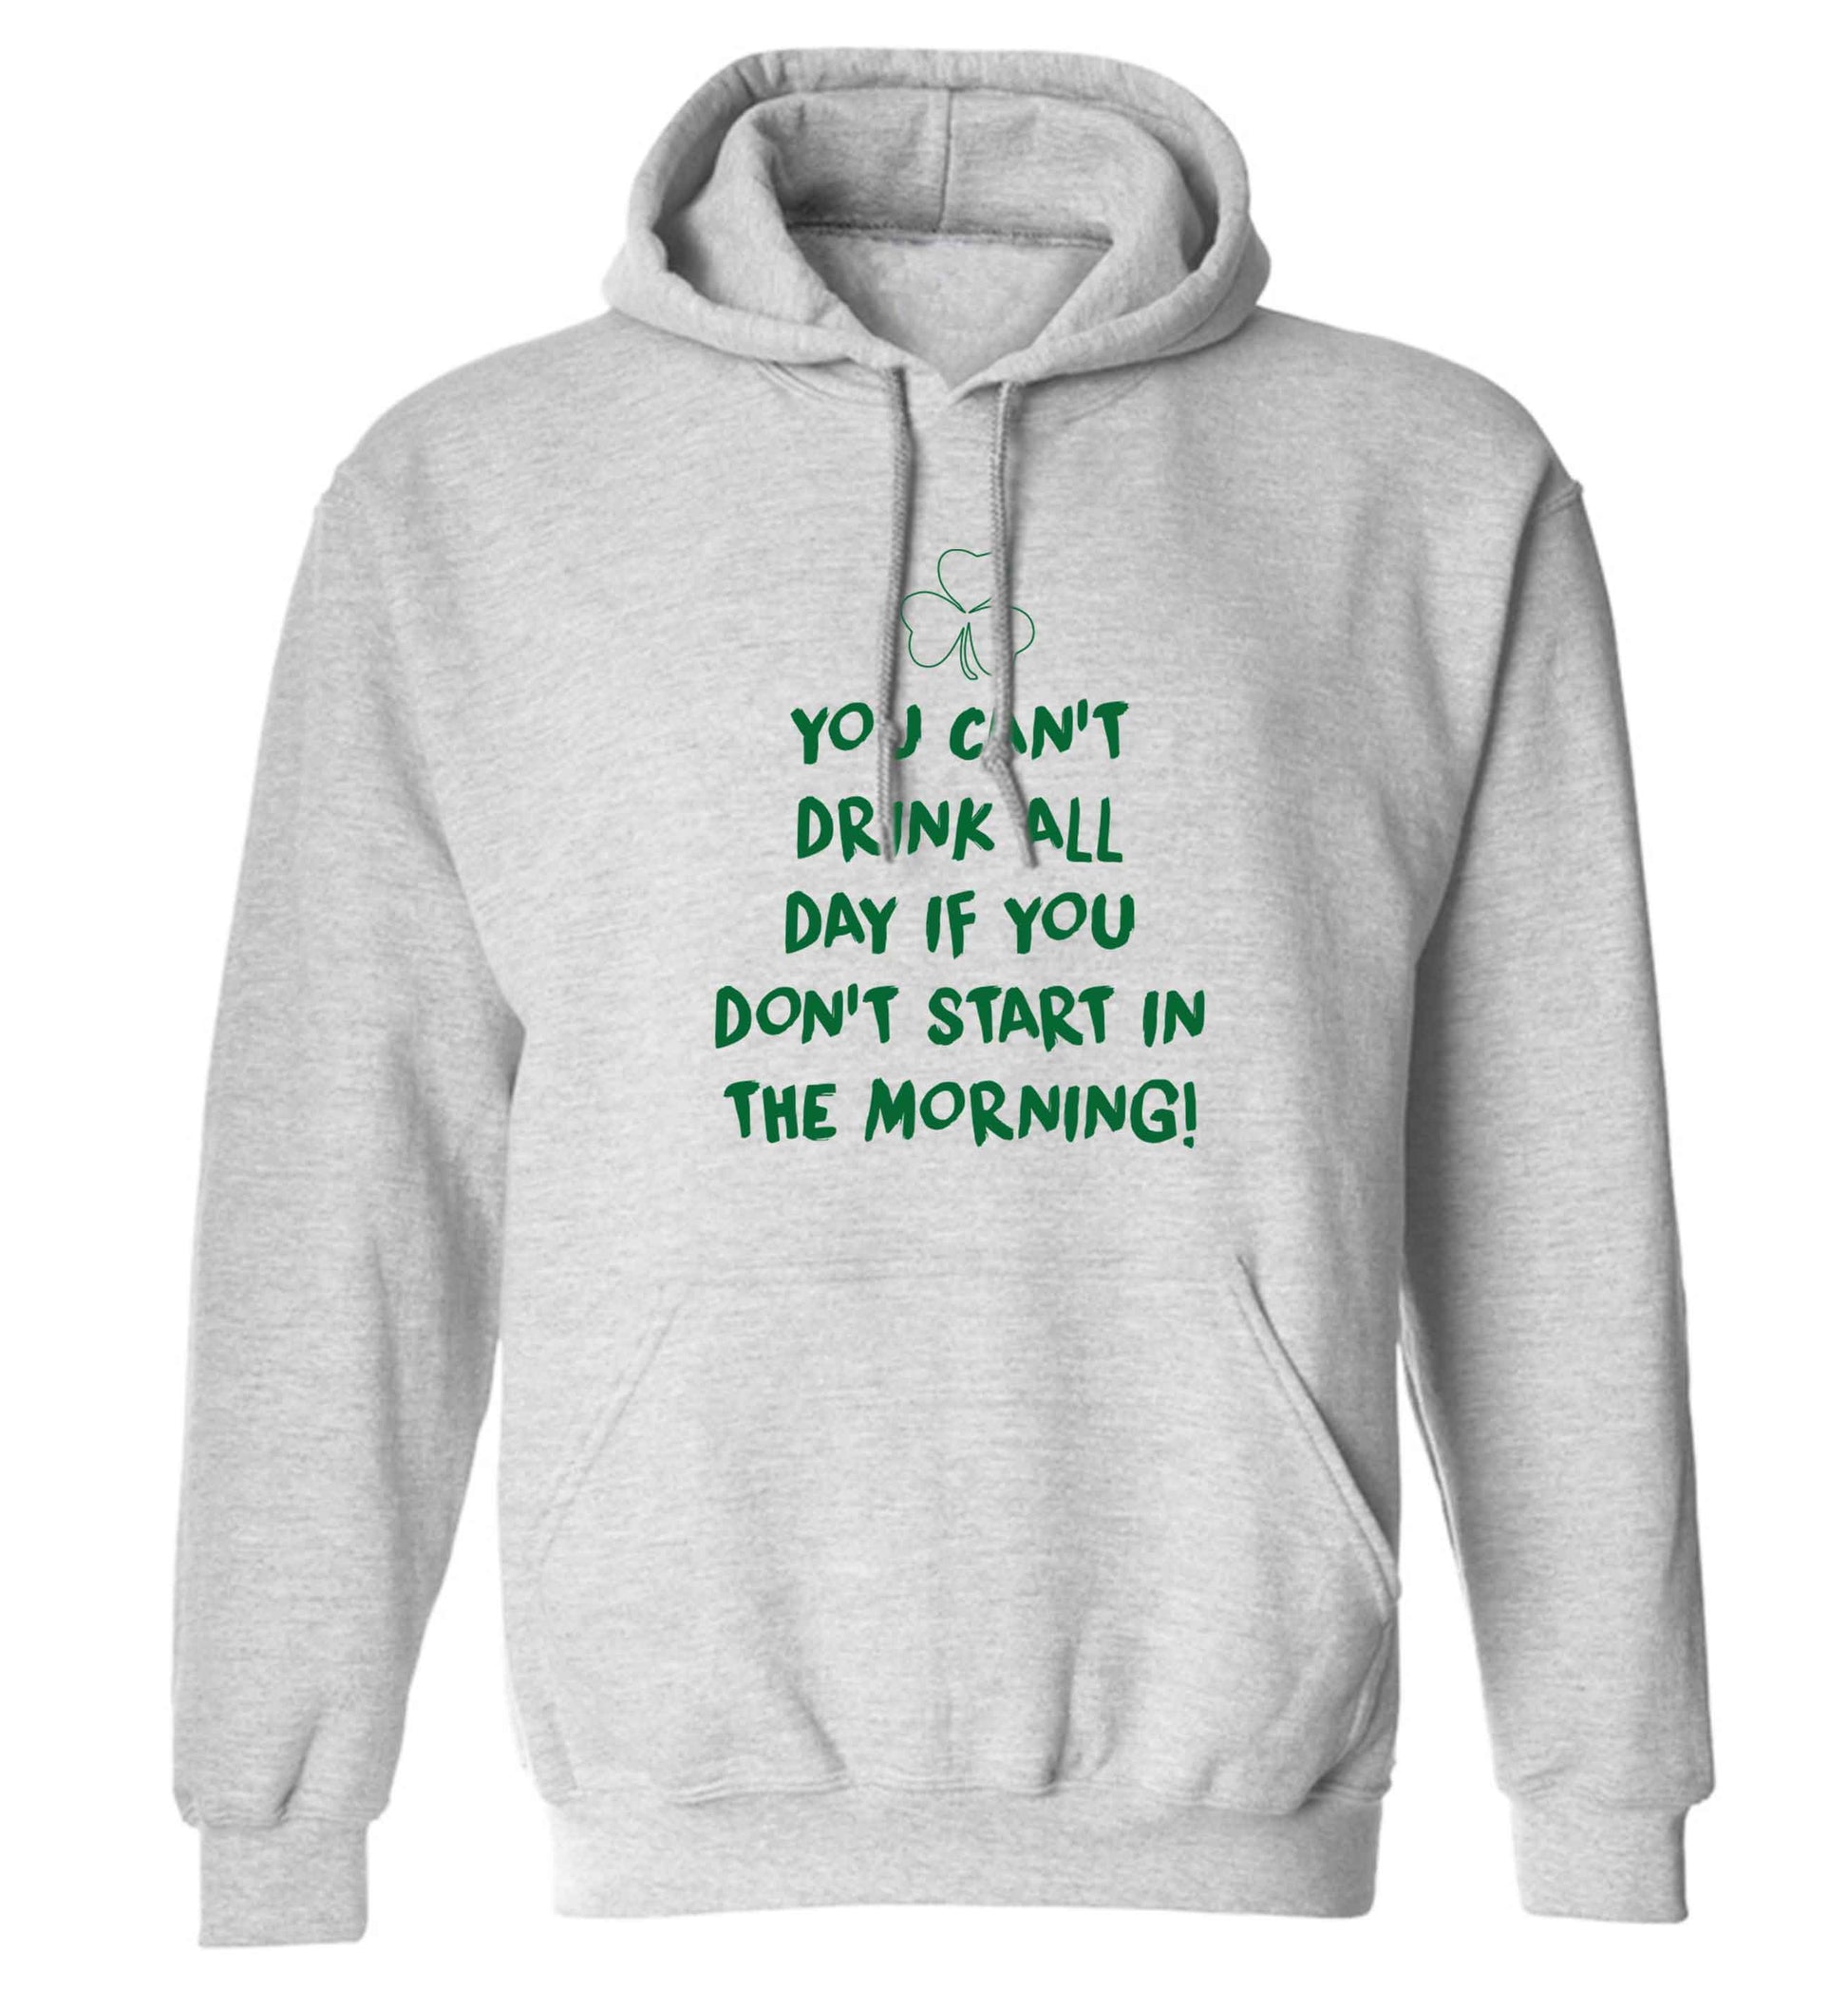 You can't drink all day if you don't start in the morning adults unisex grey hoodie 2XL